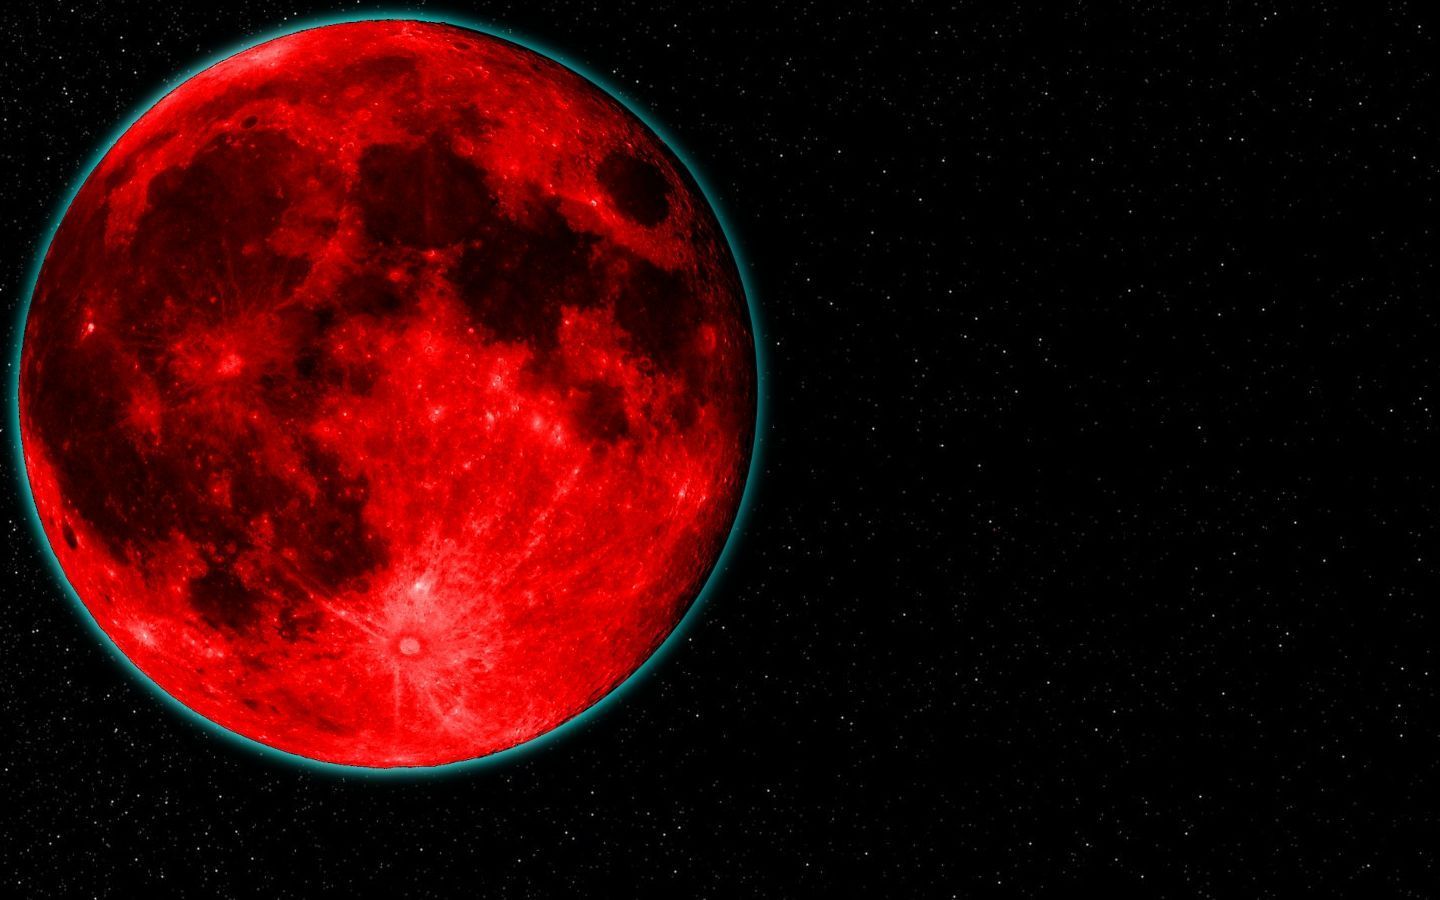 The Red Moon With Stars by kilroy567 on DeviantArt